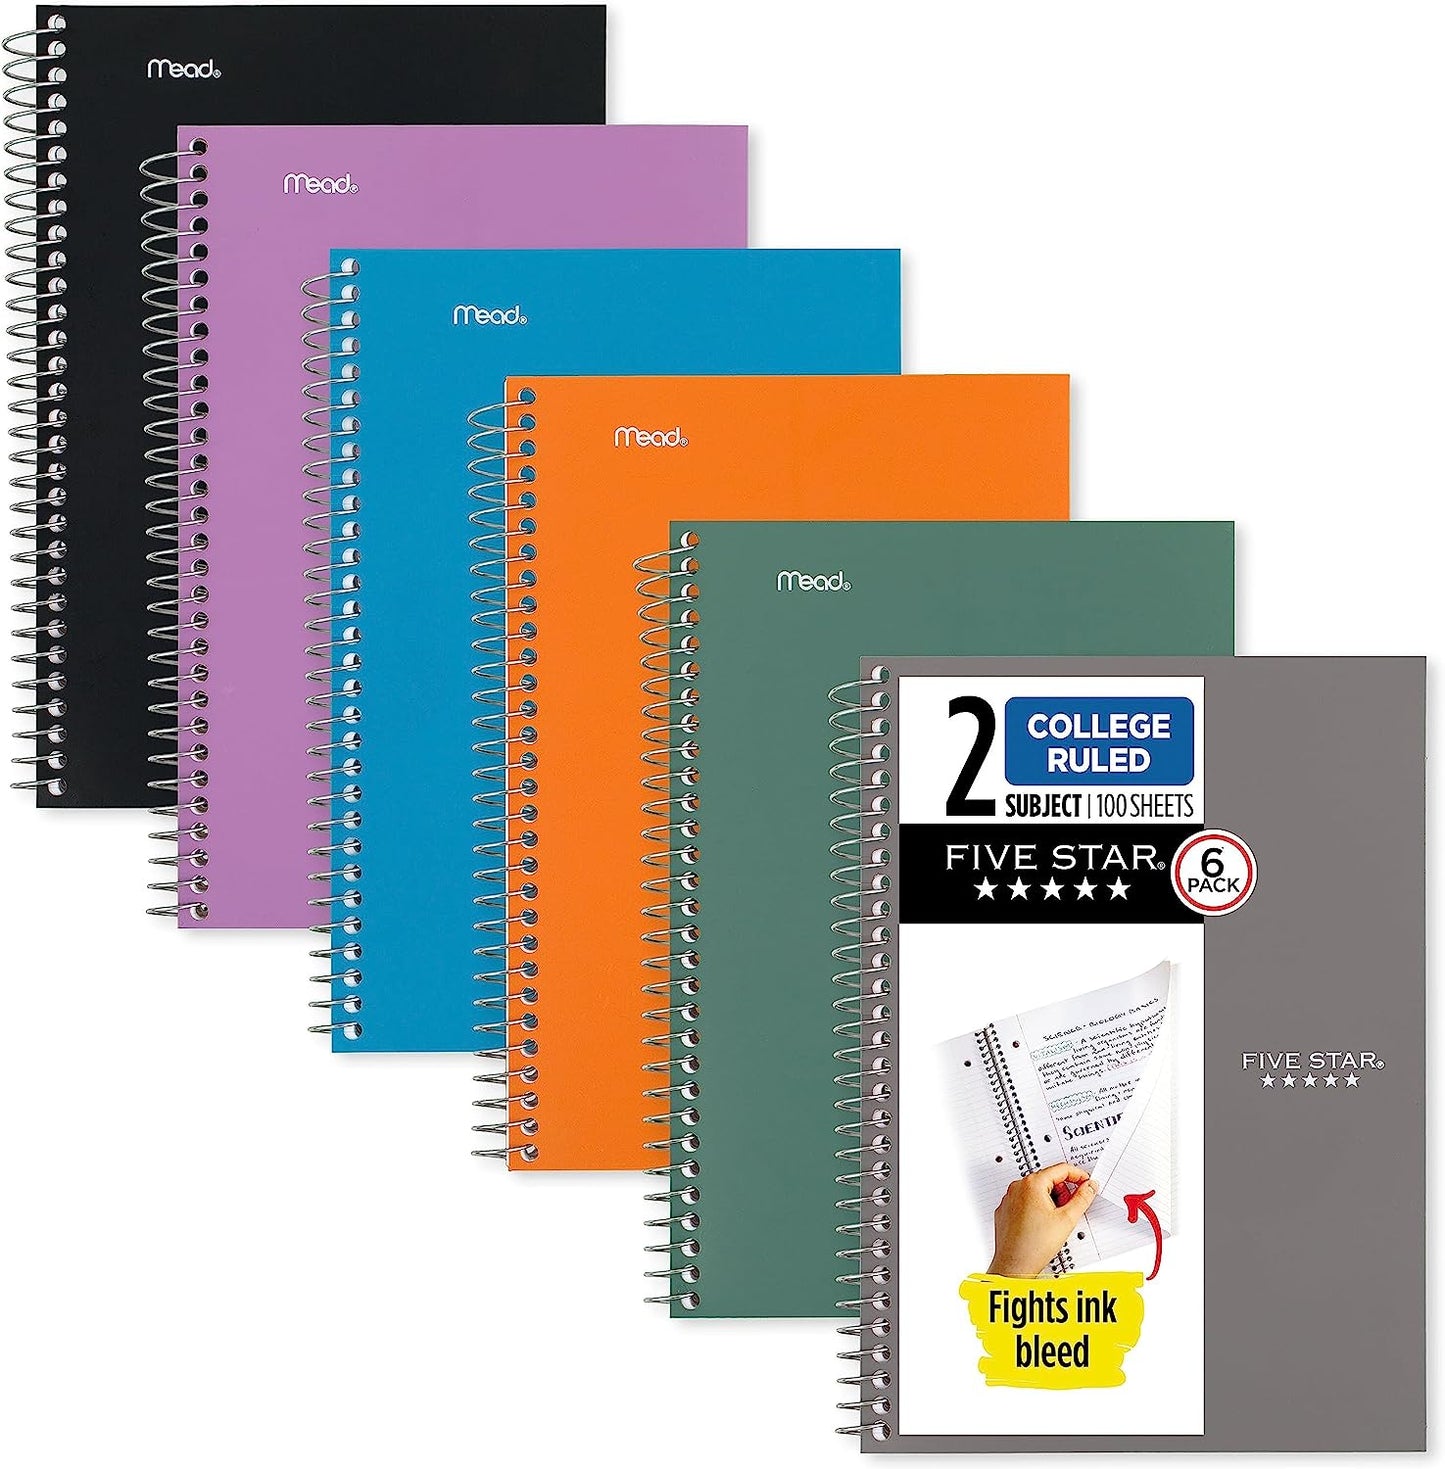 Small Spiral Notebooks, 6 Pack, 2 Subject, College Ruled Paper, 9-1/2" X 6", 100 Sheets, Amethyst Purple, Sedona Orange, Seaglass Green, Tidewater Blue, Gray, Black (73711)